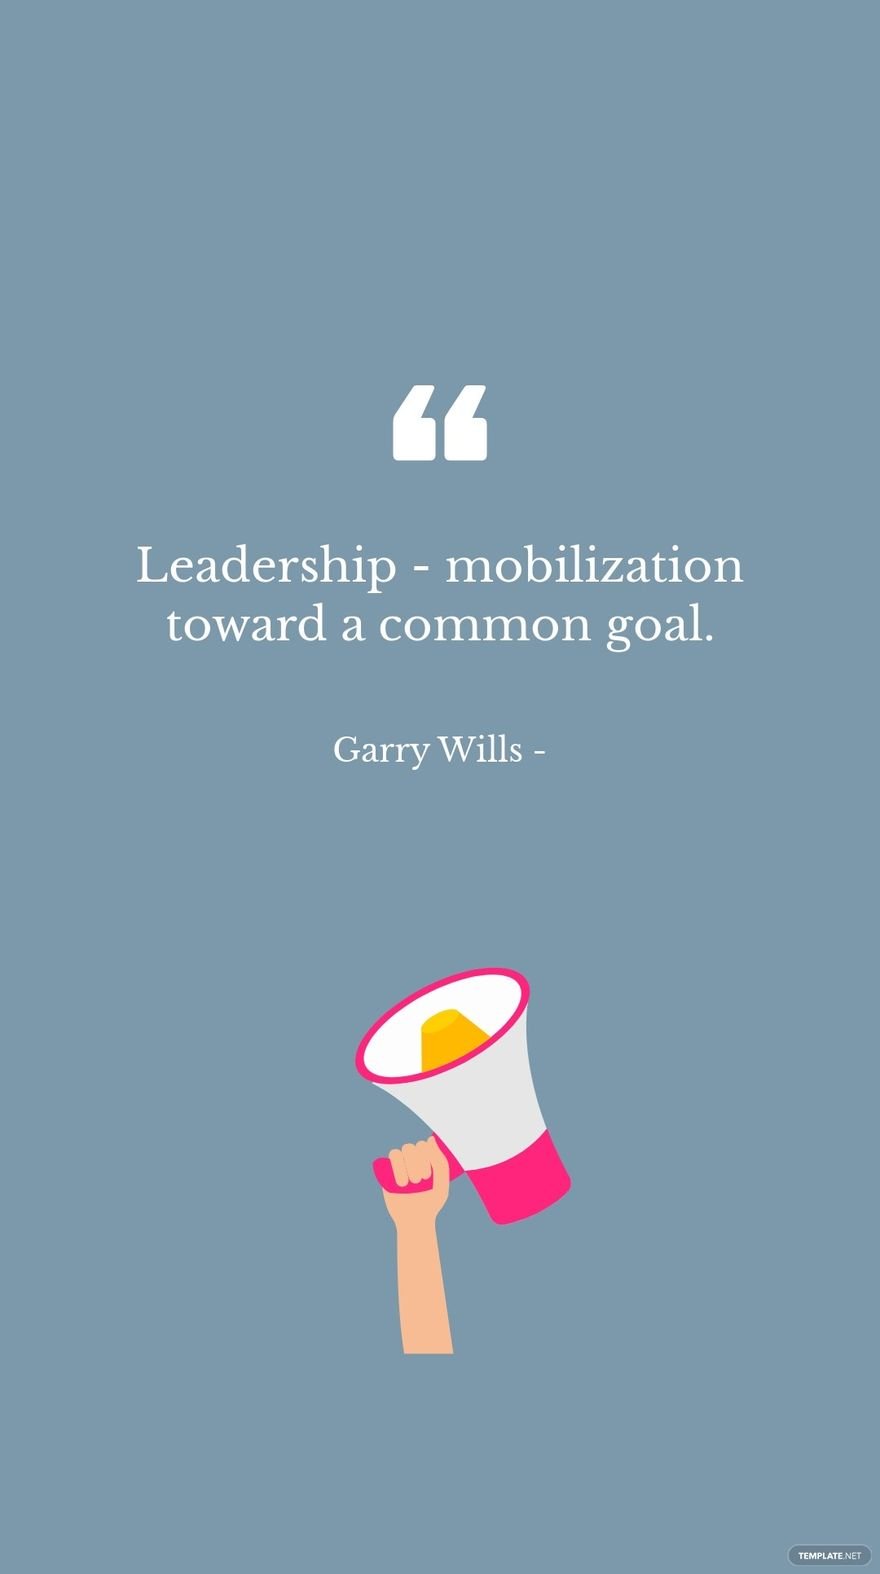 Free Garry Wills - Leadership - mobilization toward a common goal. in JPG